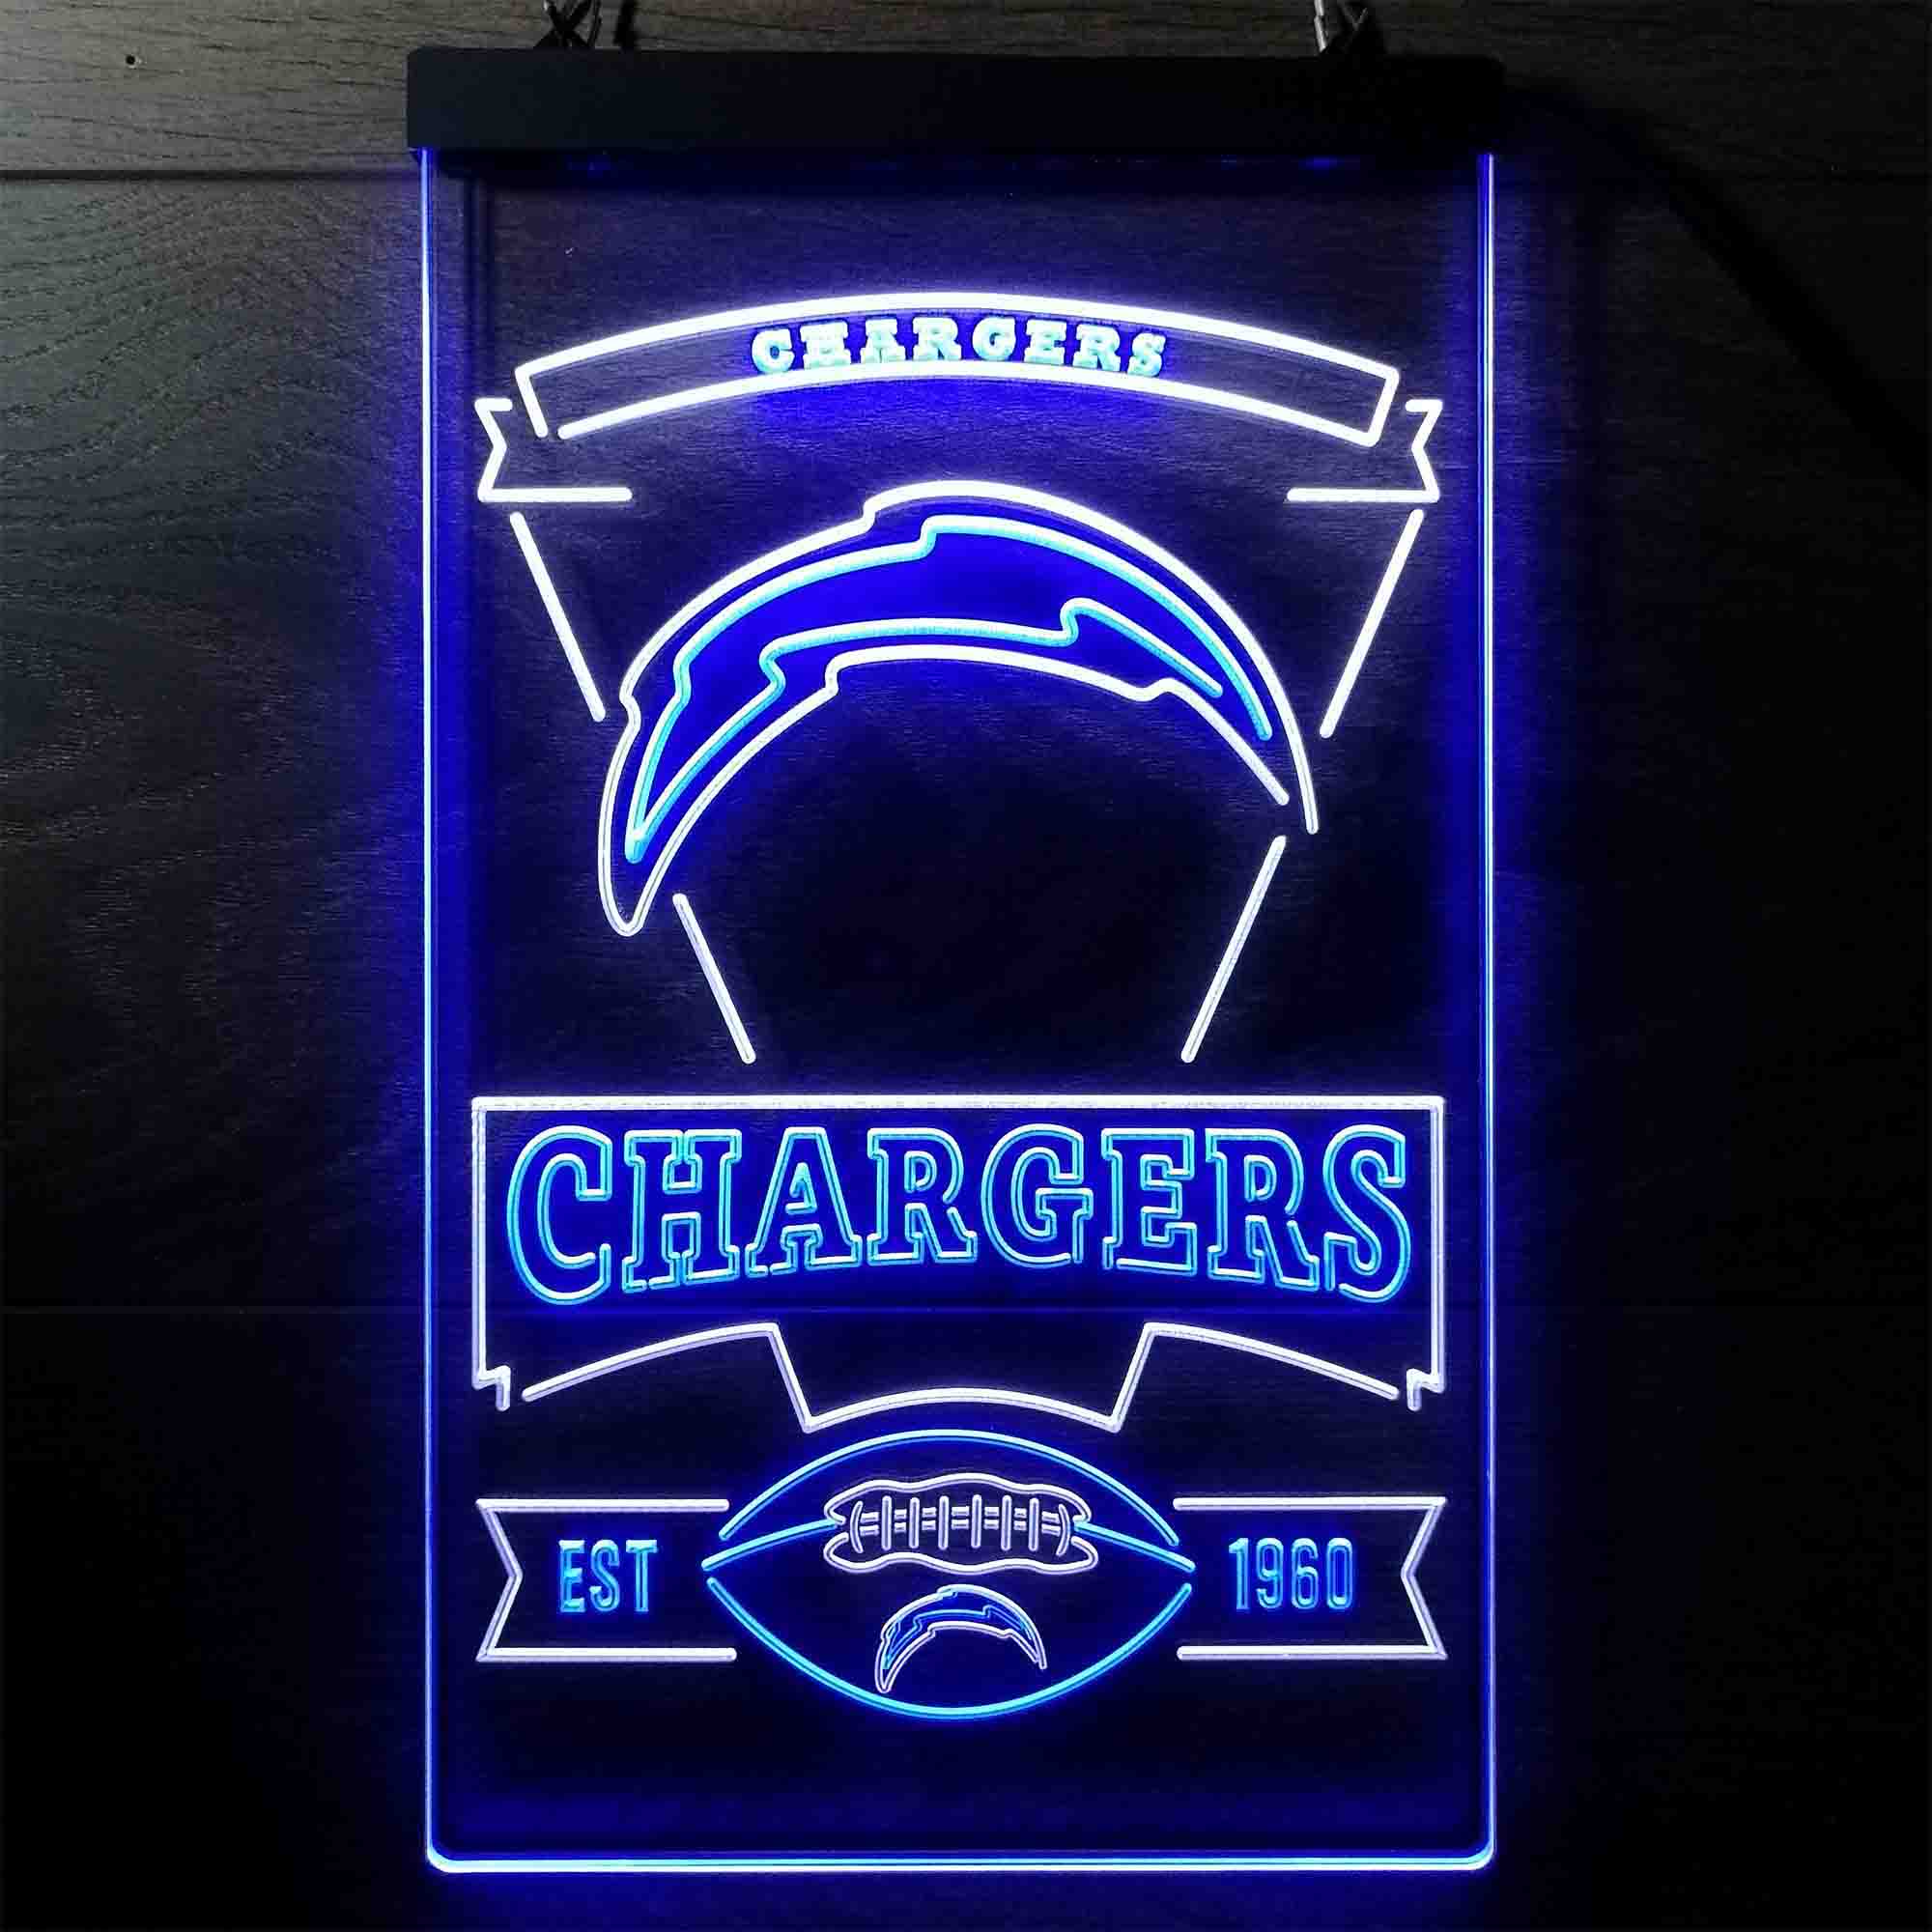 Los Angeles Chargers Est. 1960 Neon-Like LED Sign